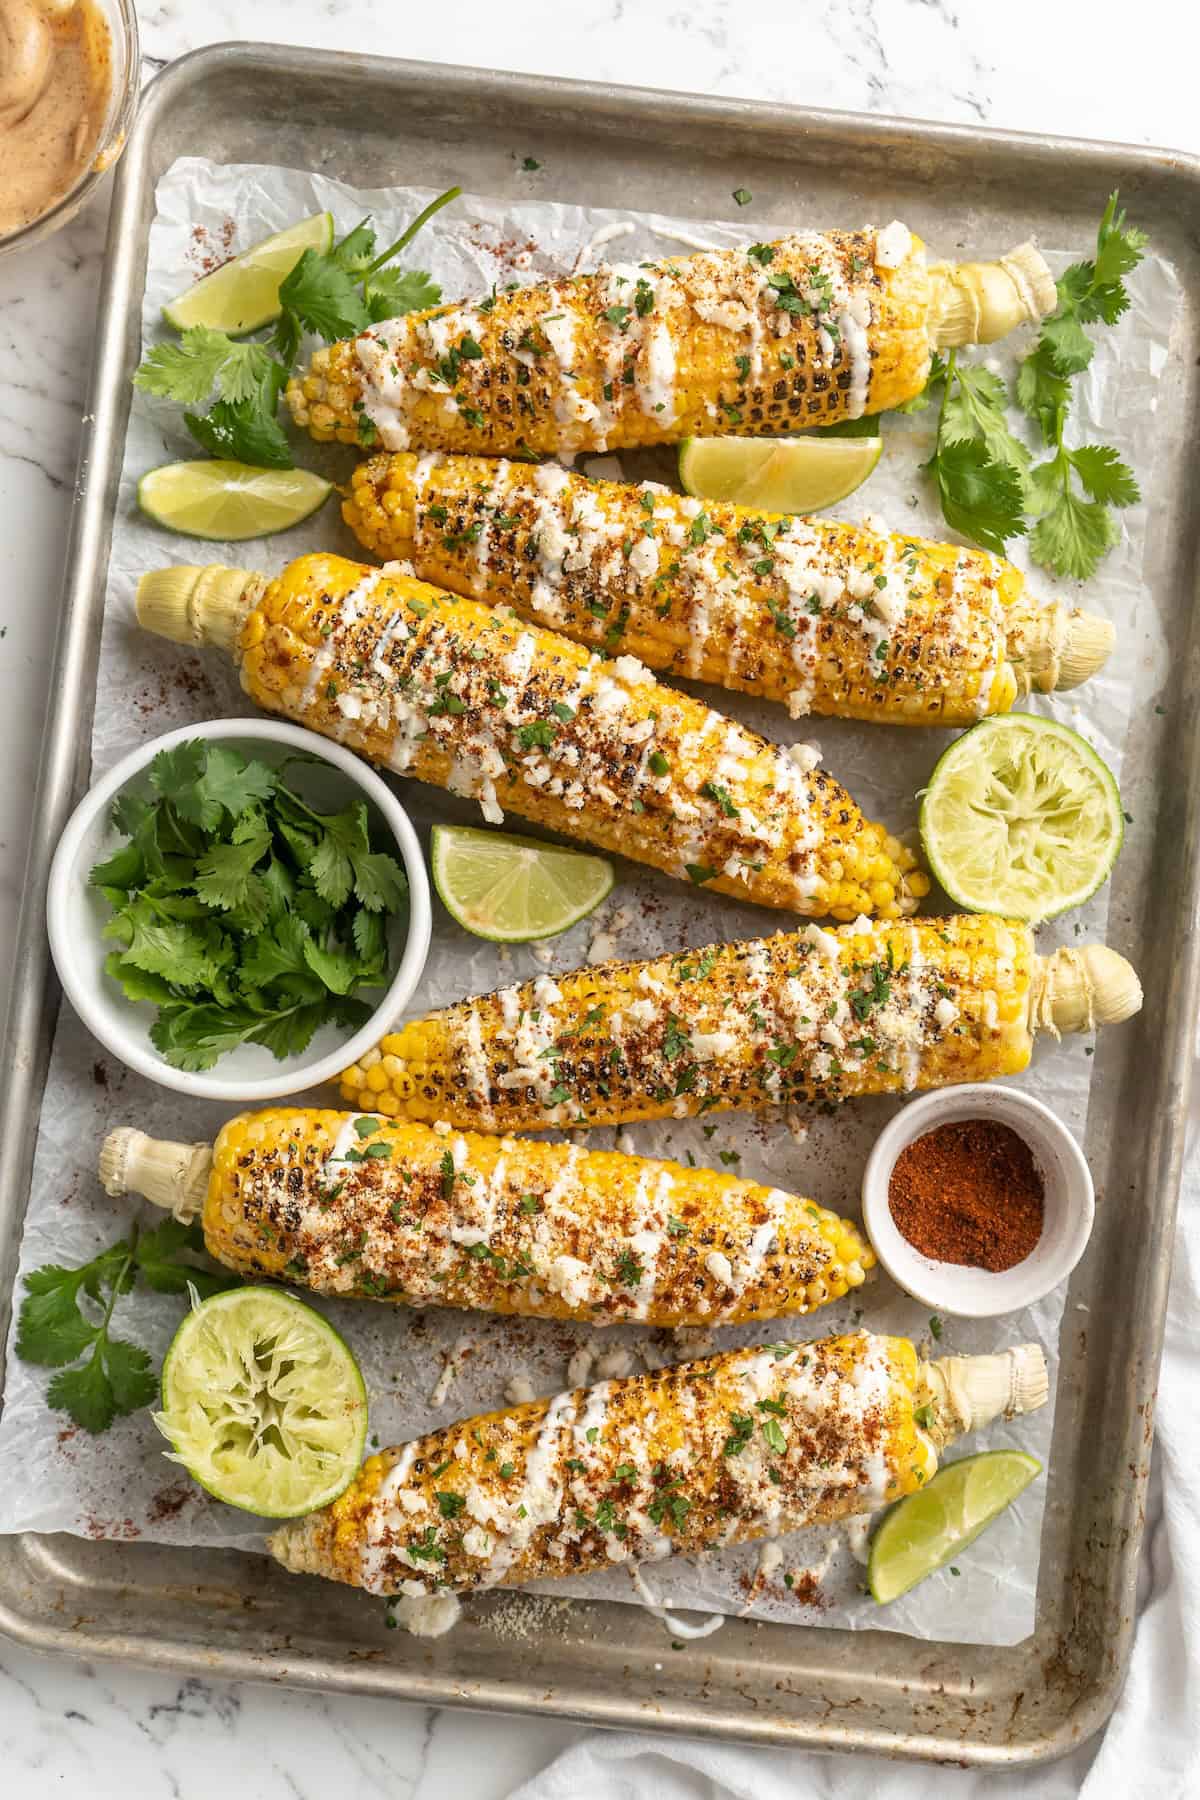 Overhead view of elotes on sheet pan with toppings and garnishes